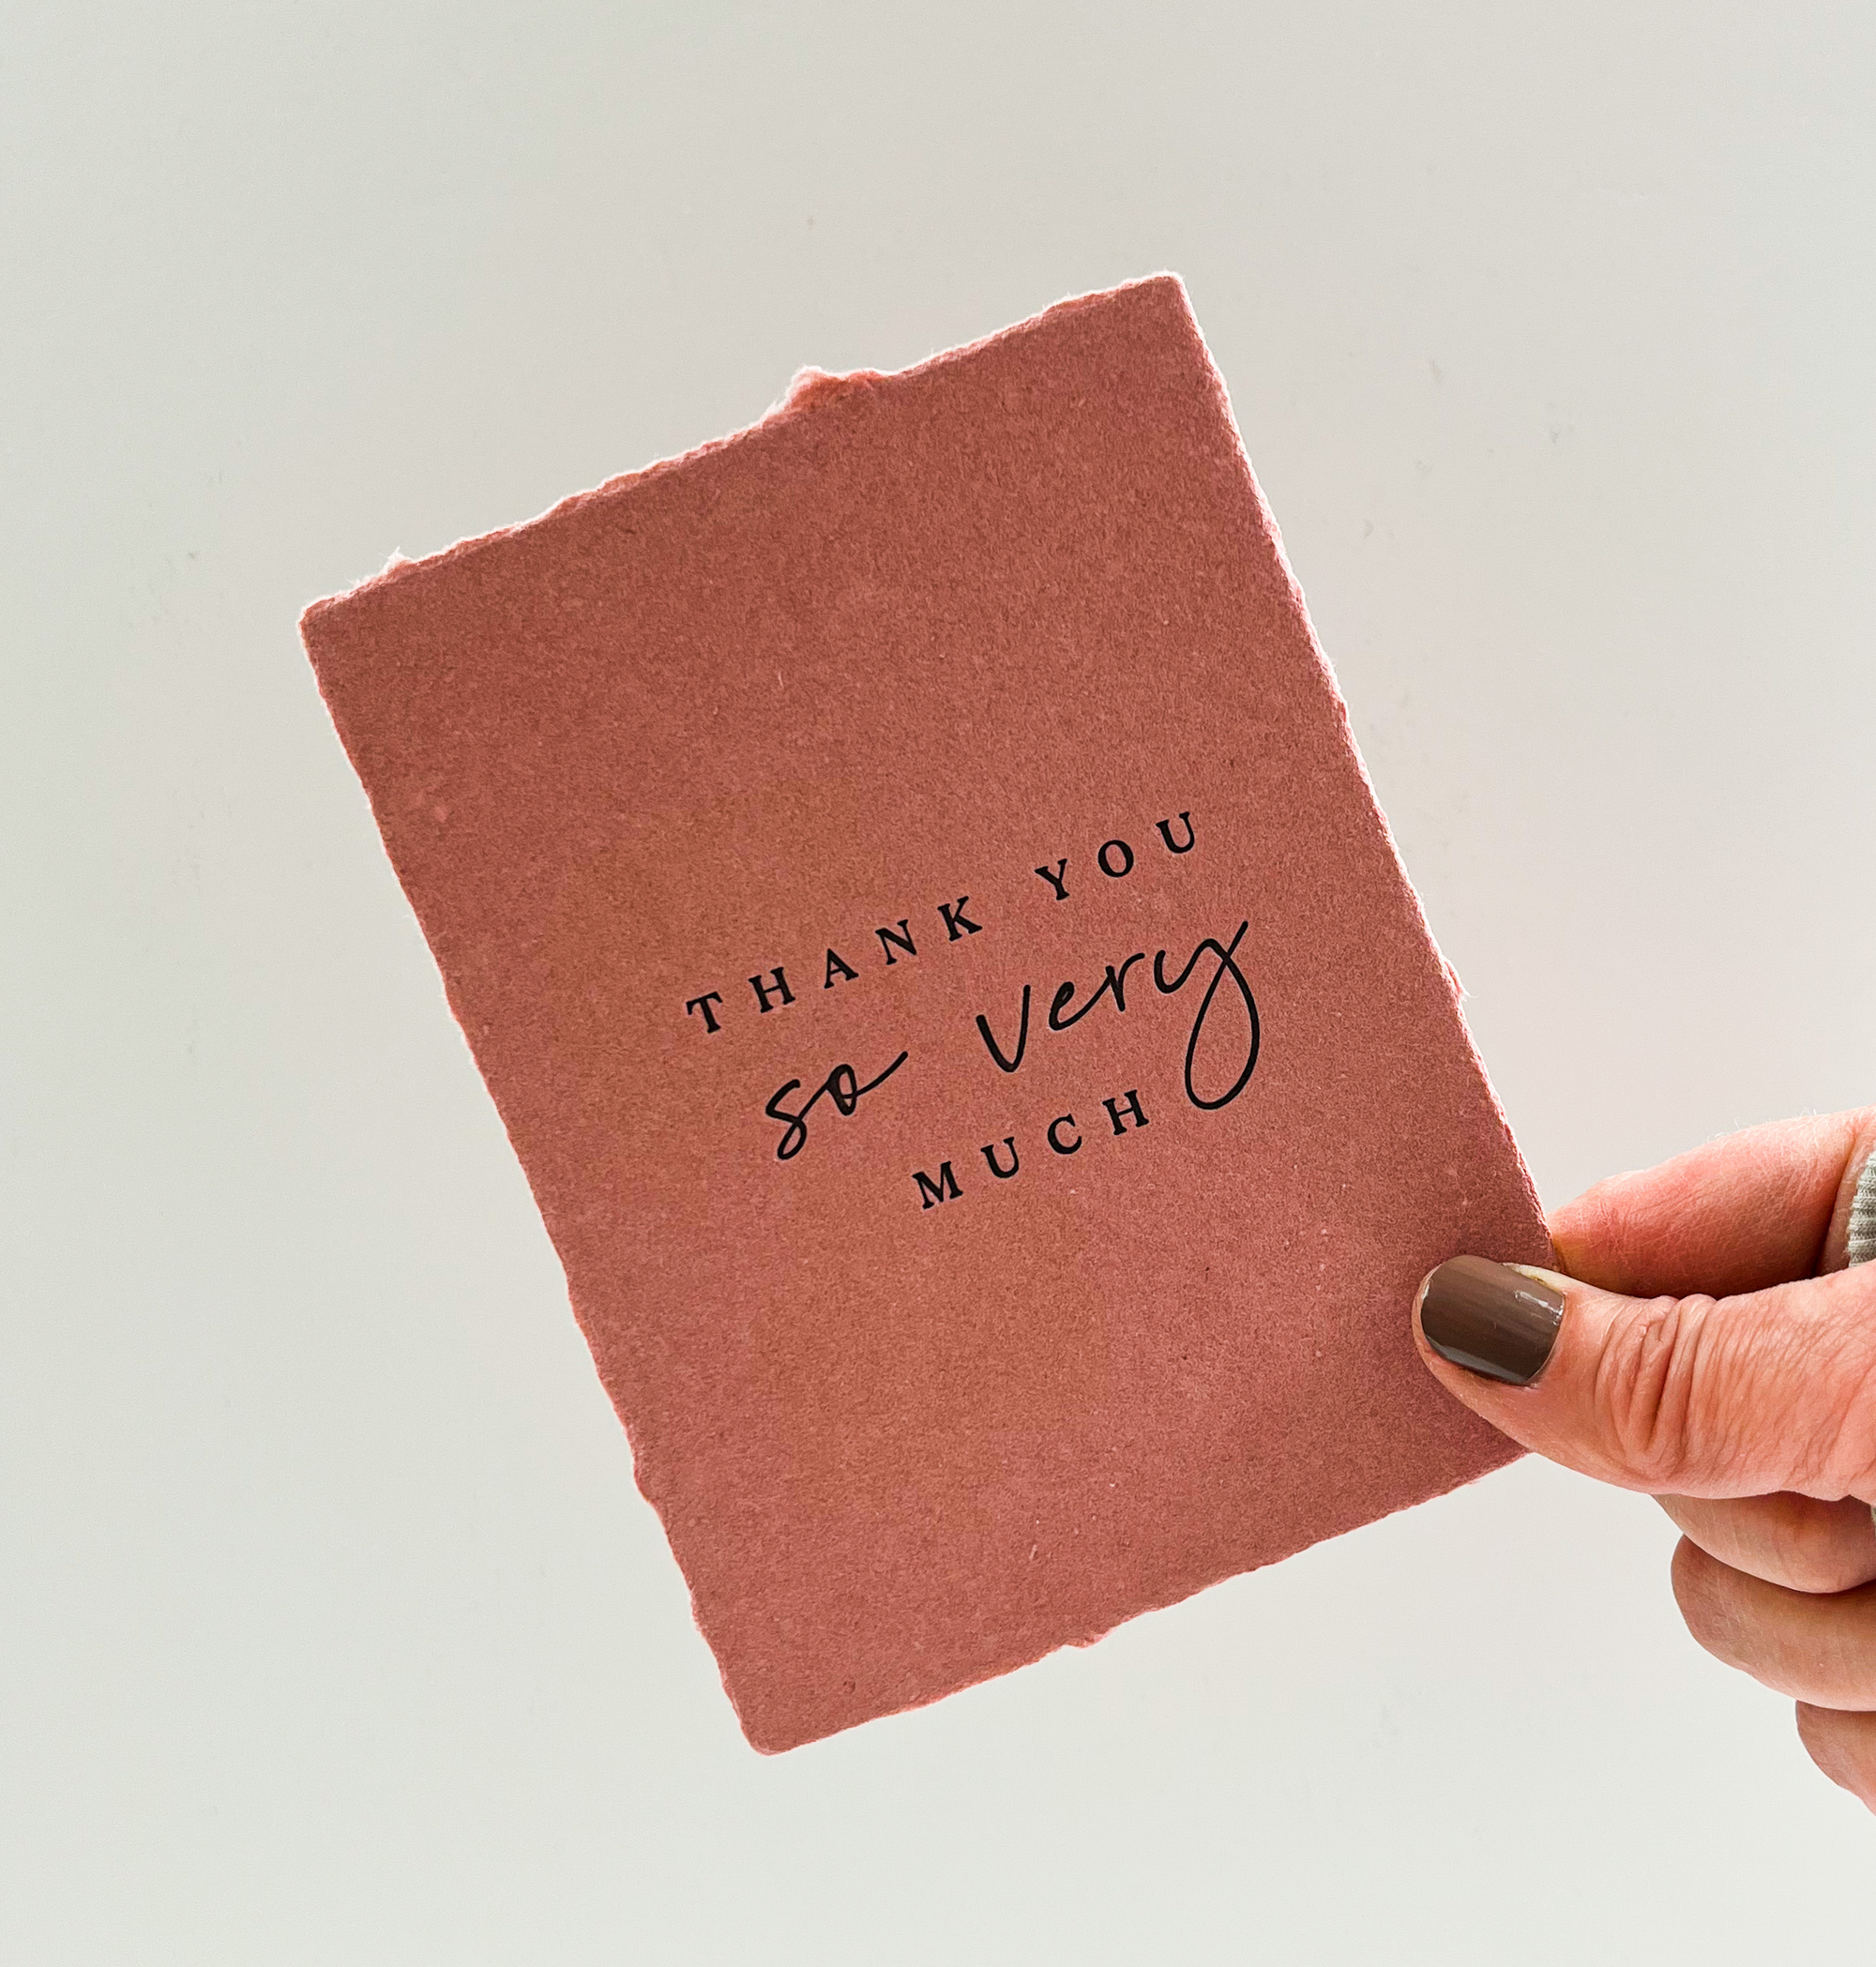 "Thank you so very much" Greeting Card